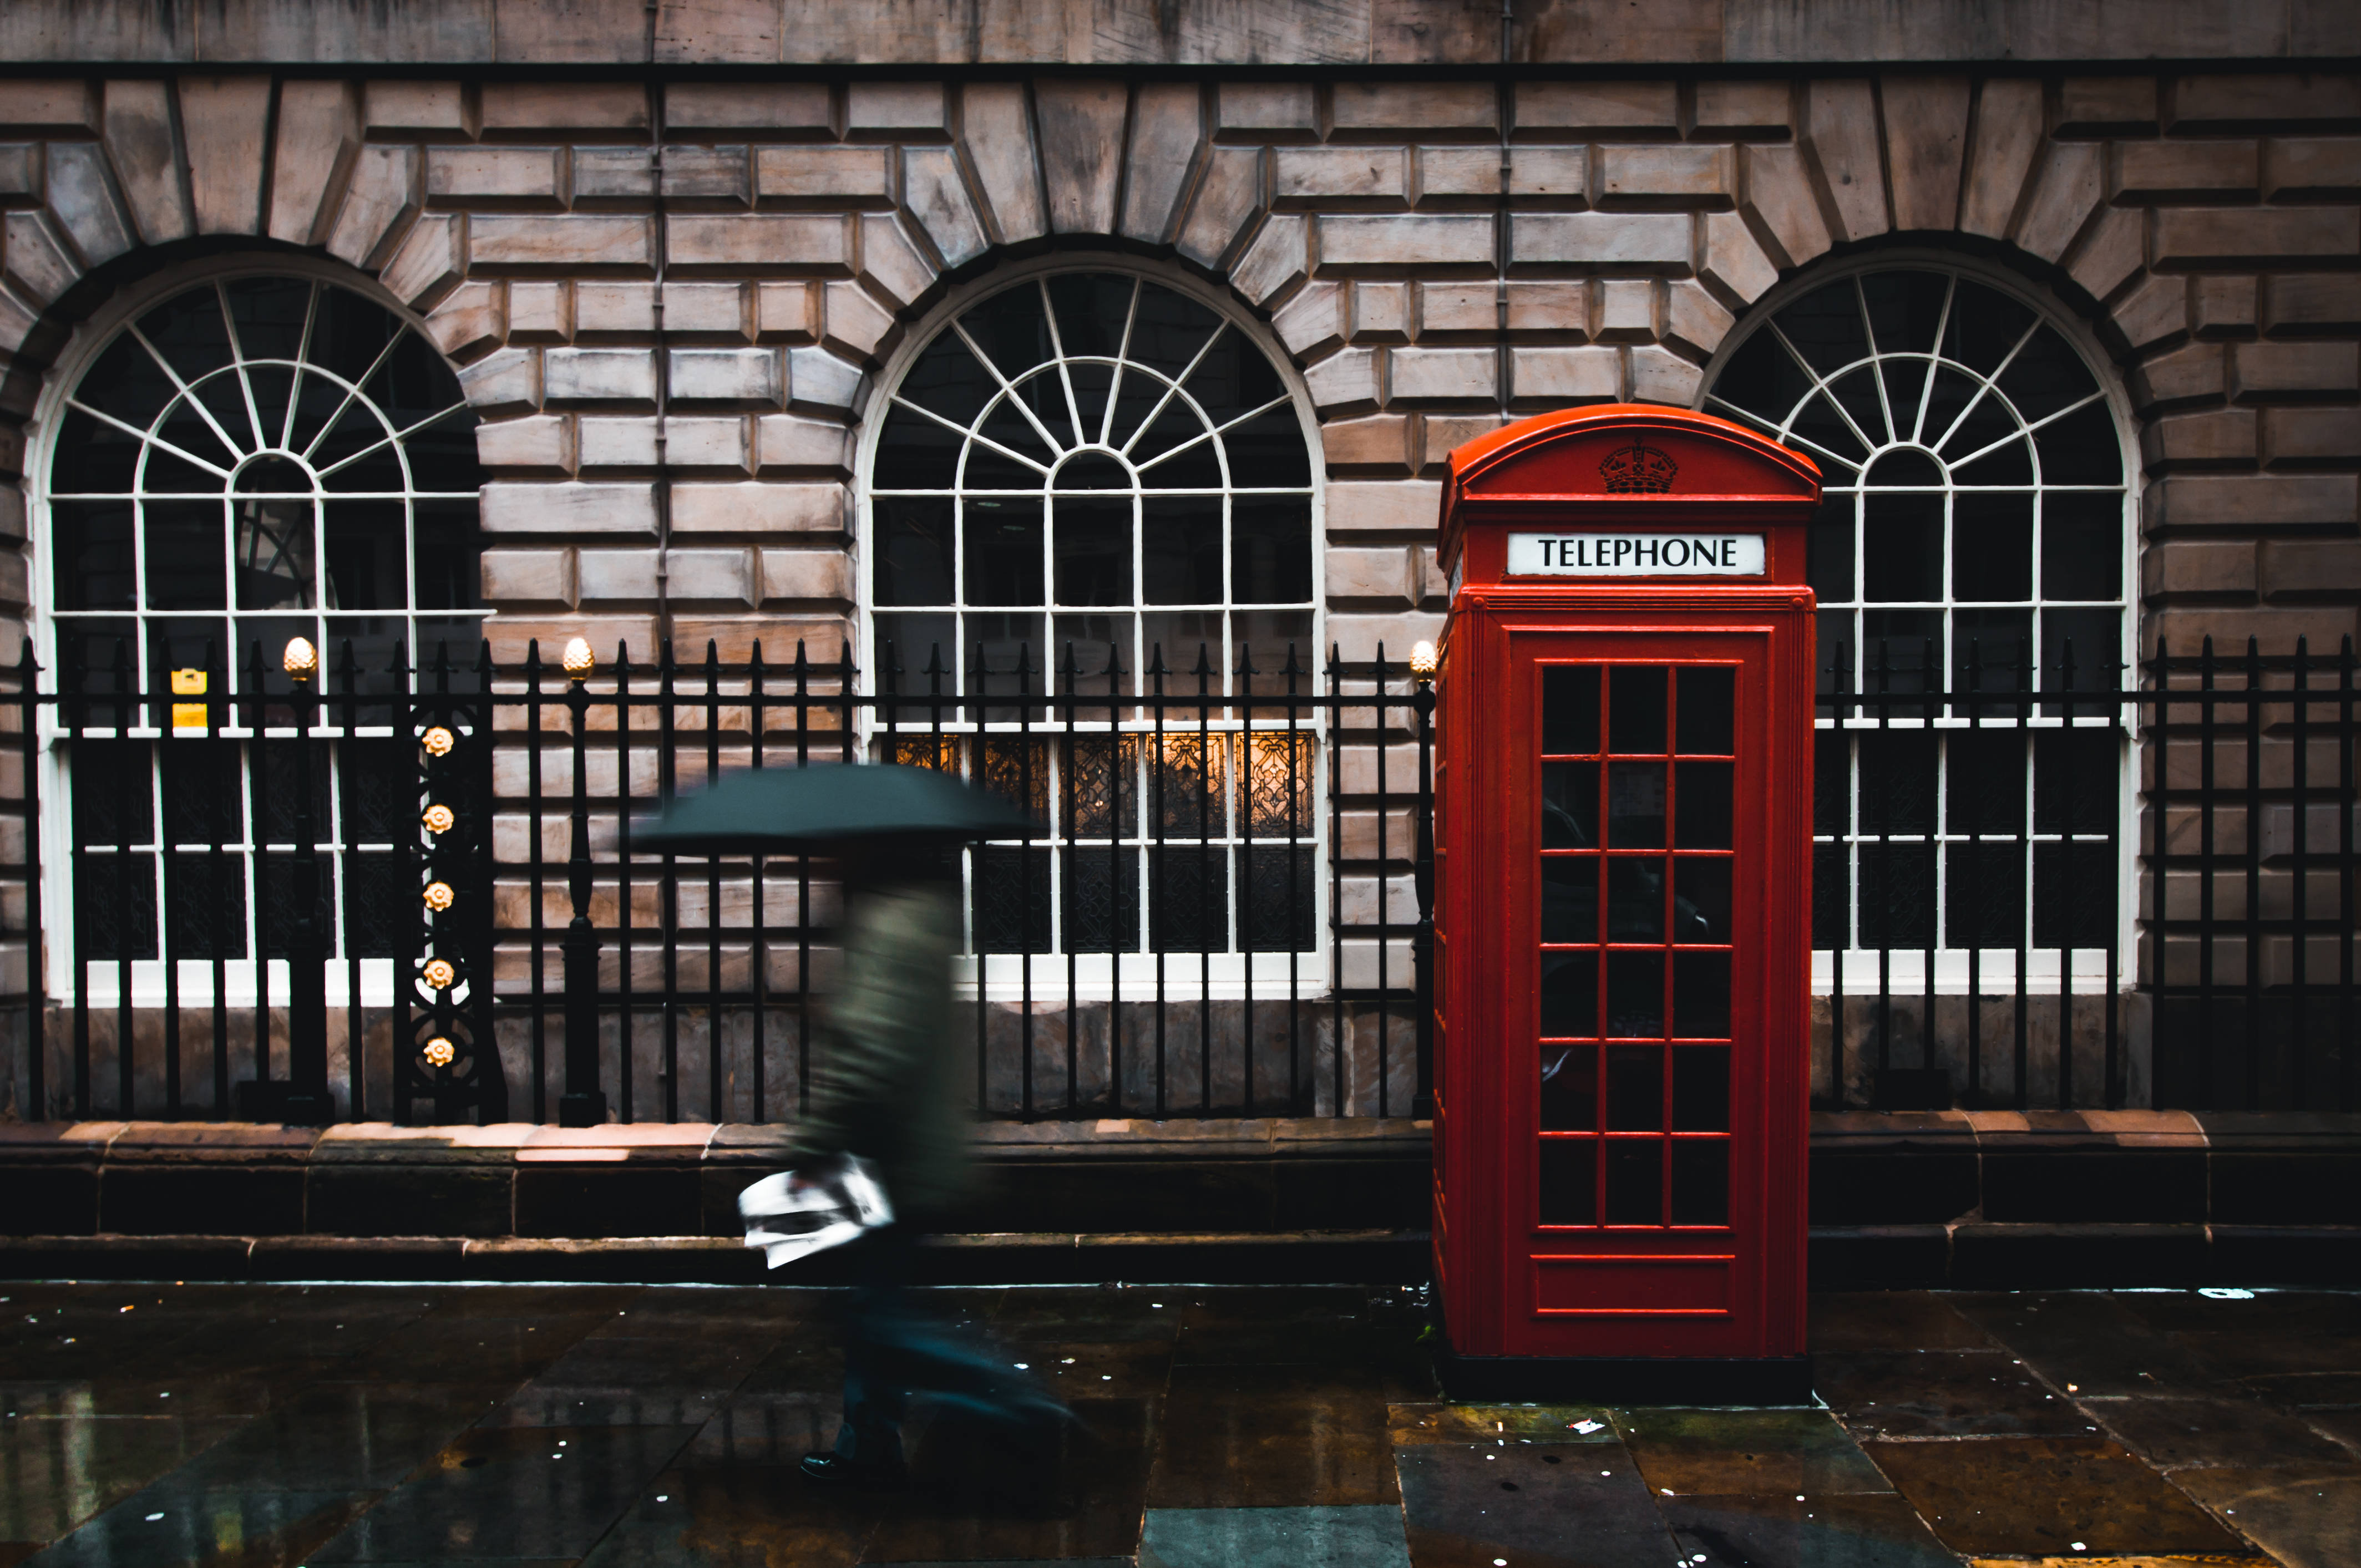 London phone booth Stock Photos Royalty Free London phone booth Images   Depositphotos